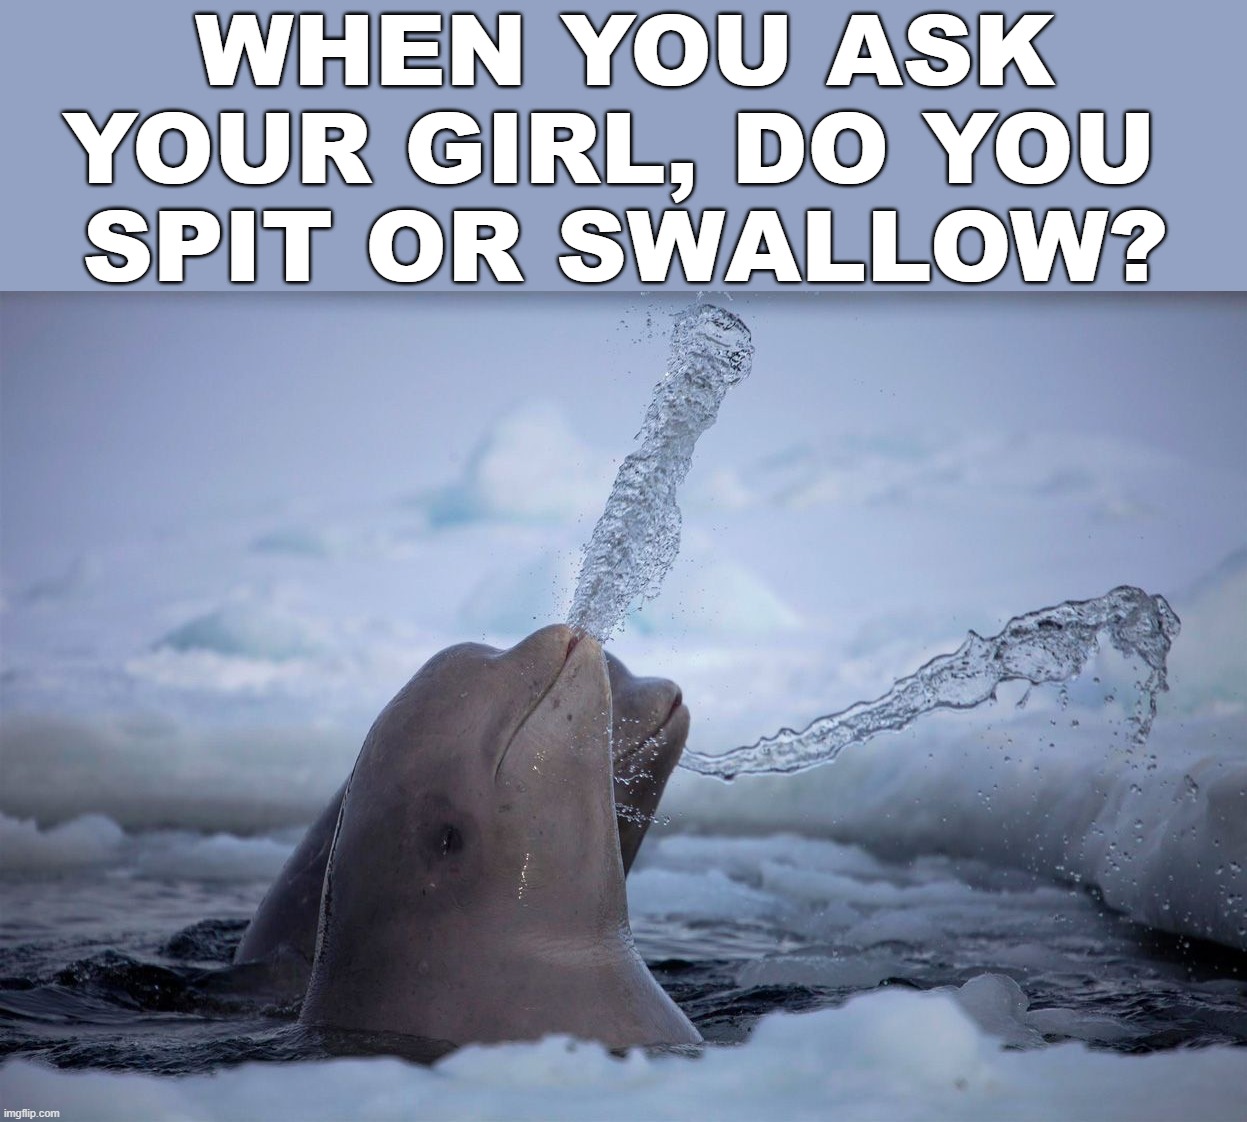 WHEN YOU ASK YOUR GIRL, DO YOU 
SPIT OR SWALLOW? | image tagged in swallow,spit | made w/ Imgflip meme maker